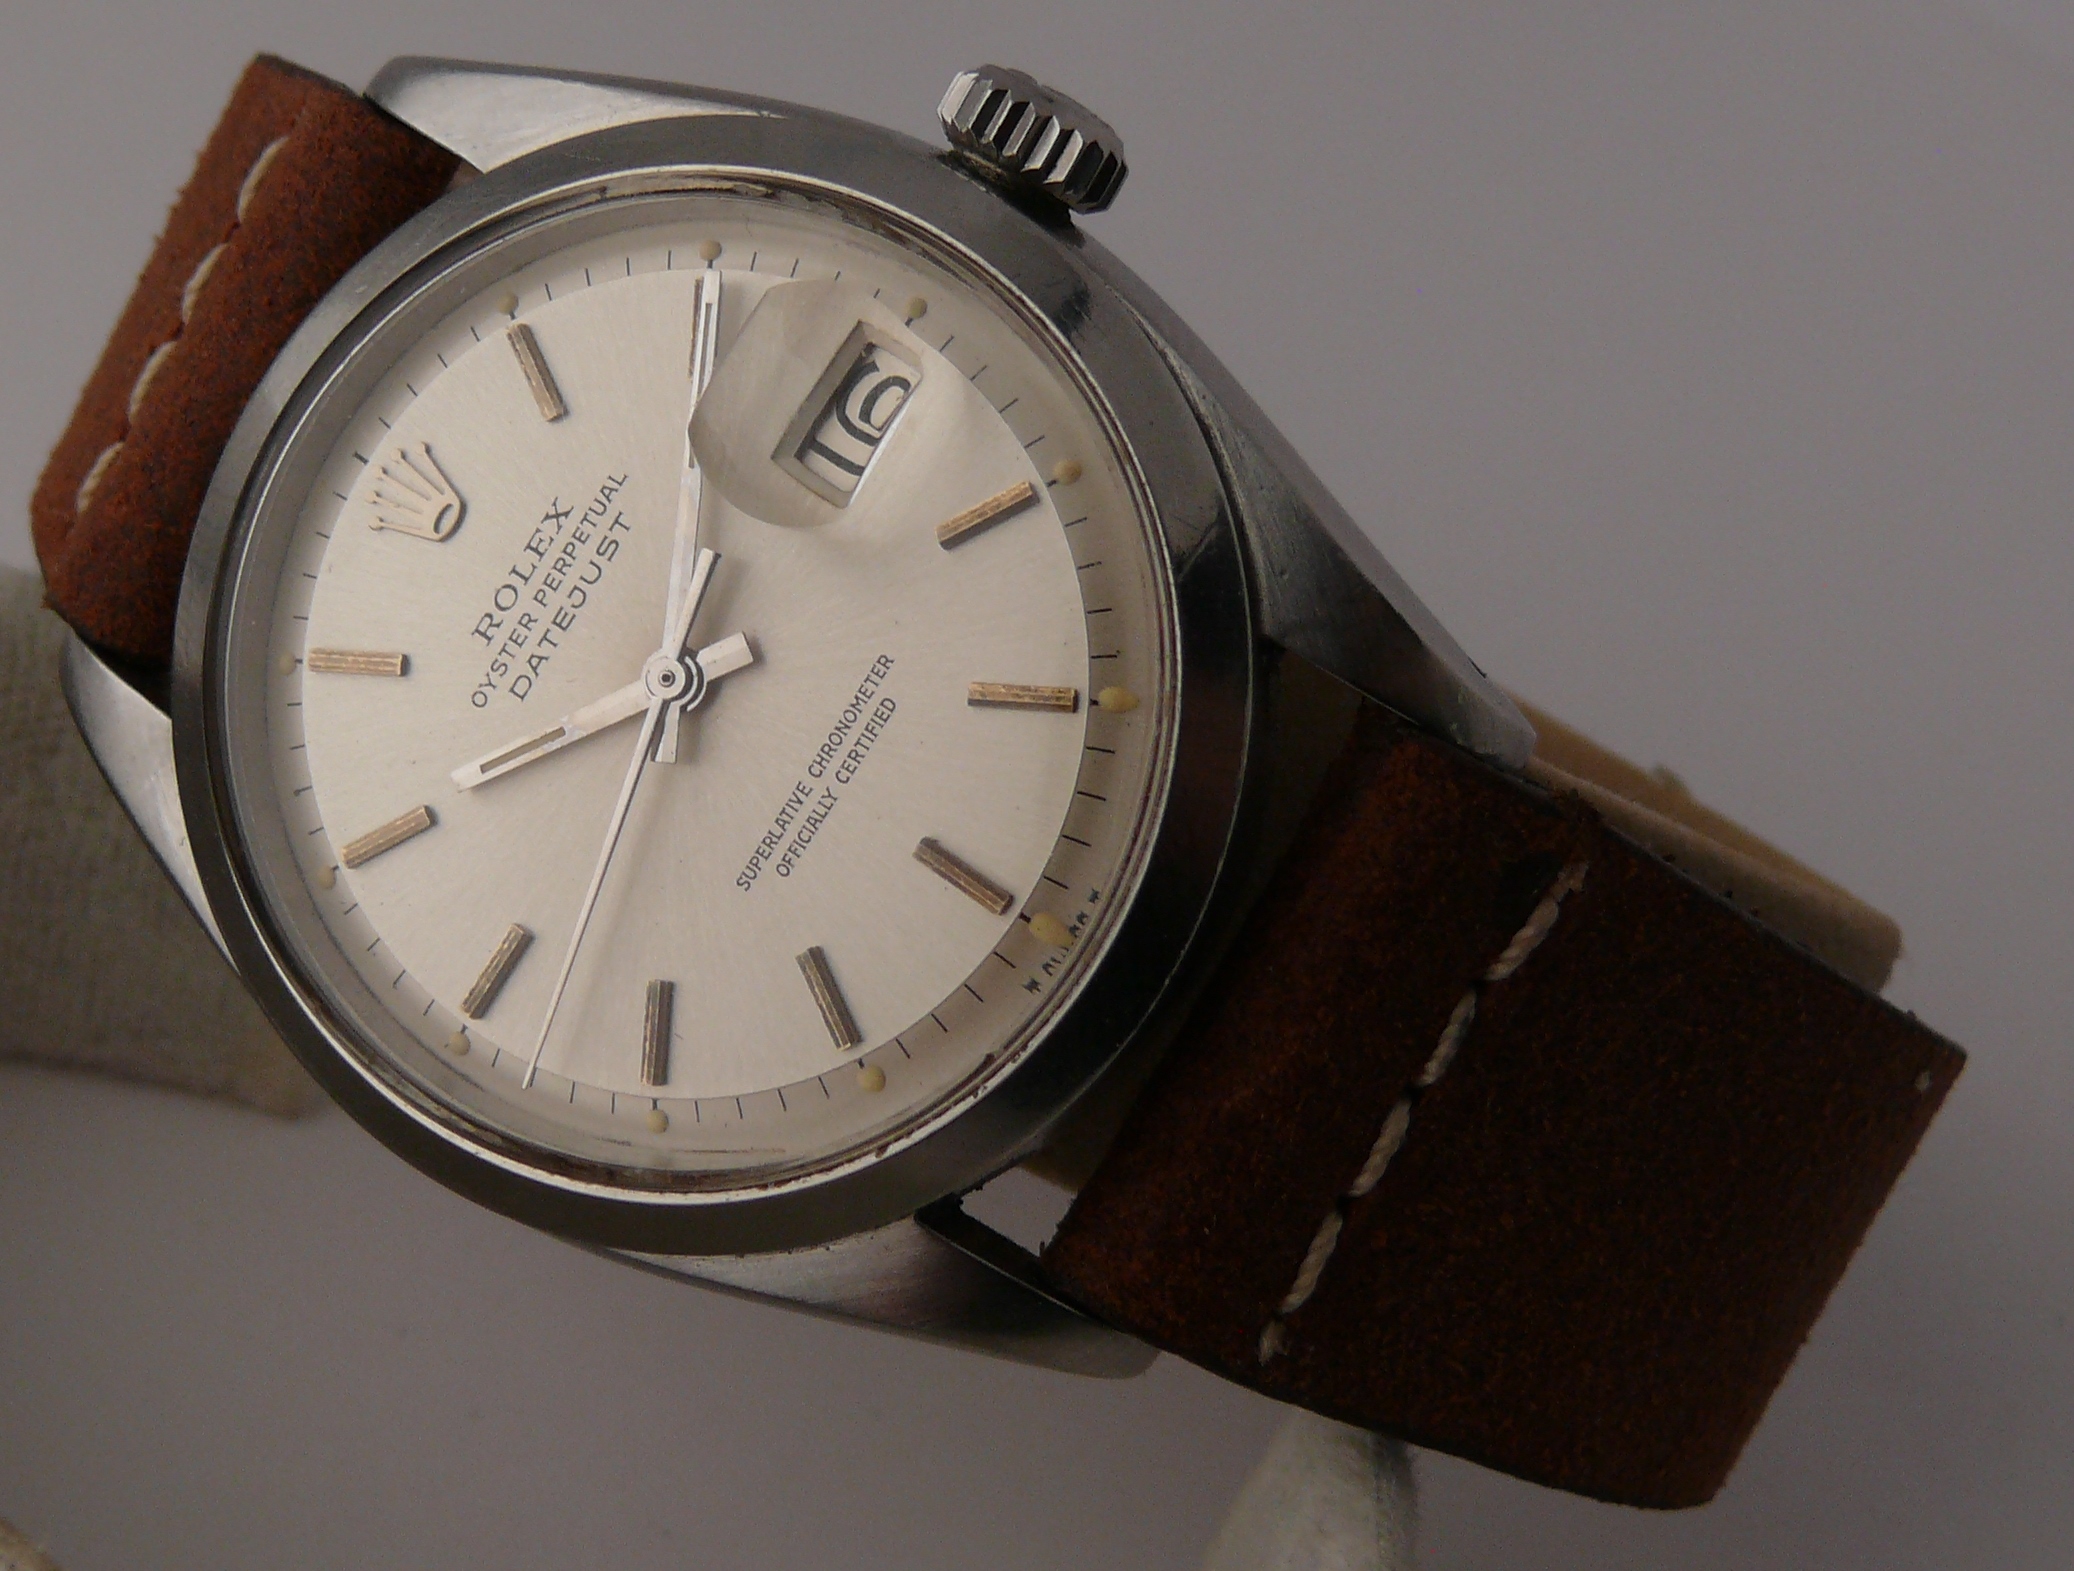 1958 Rolex Oyster Perpetual Datejust Ref 6605 6604, a vintage 1958 Rolex Oyster Perpetual Datejust - Image 2 of 14